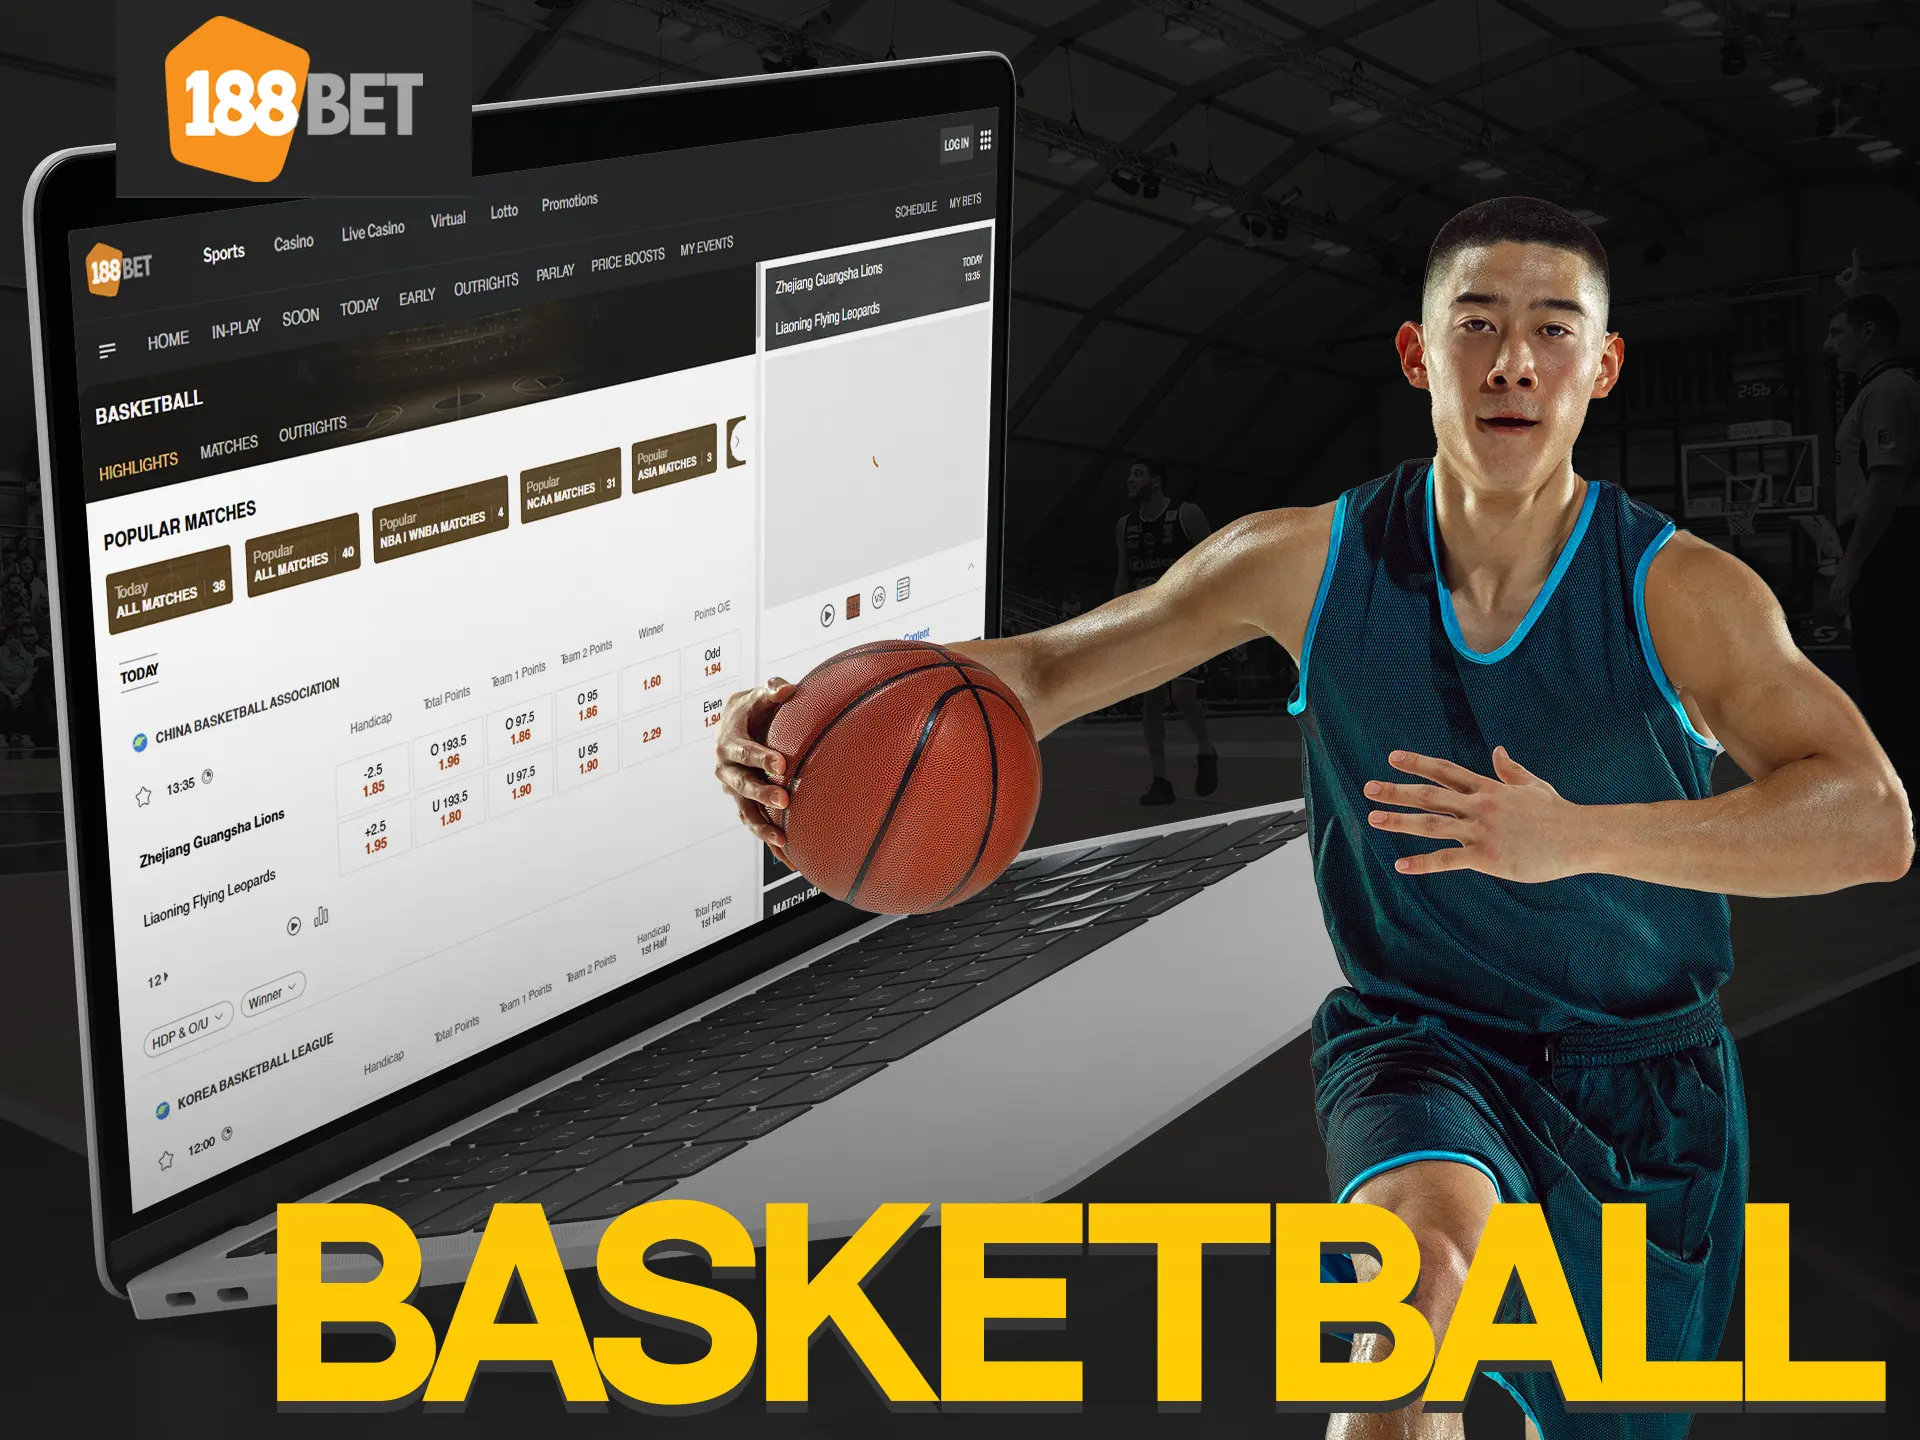 Place your basketball bets at 188bet.